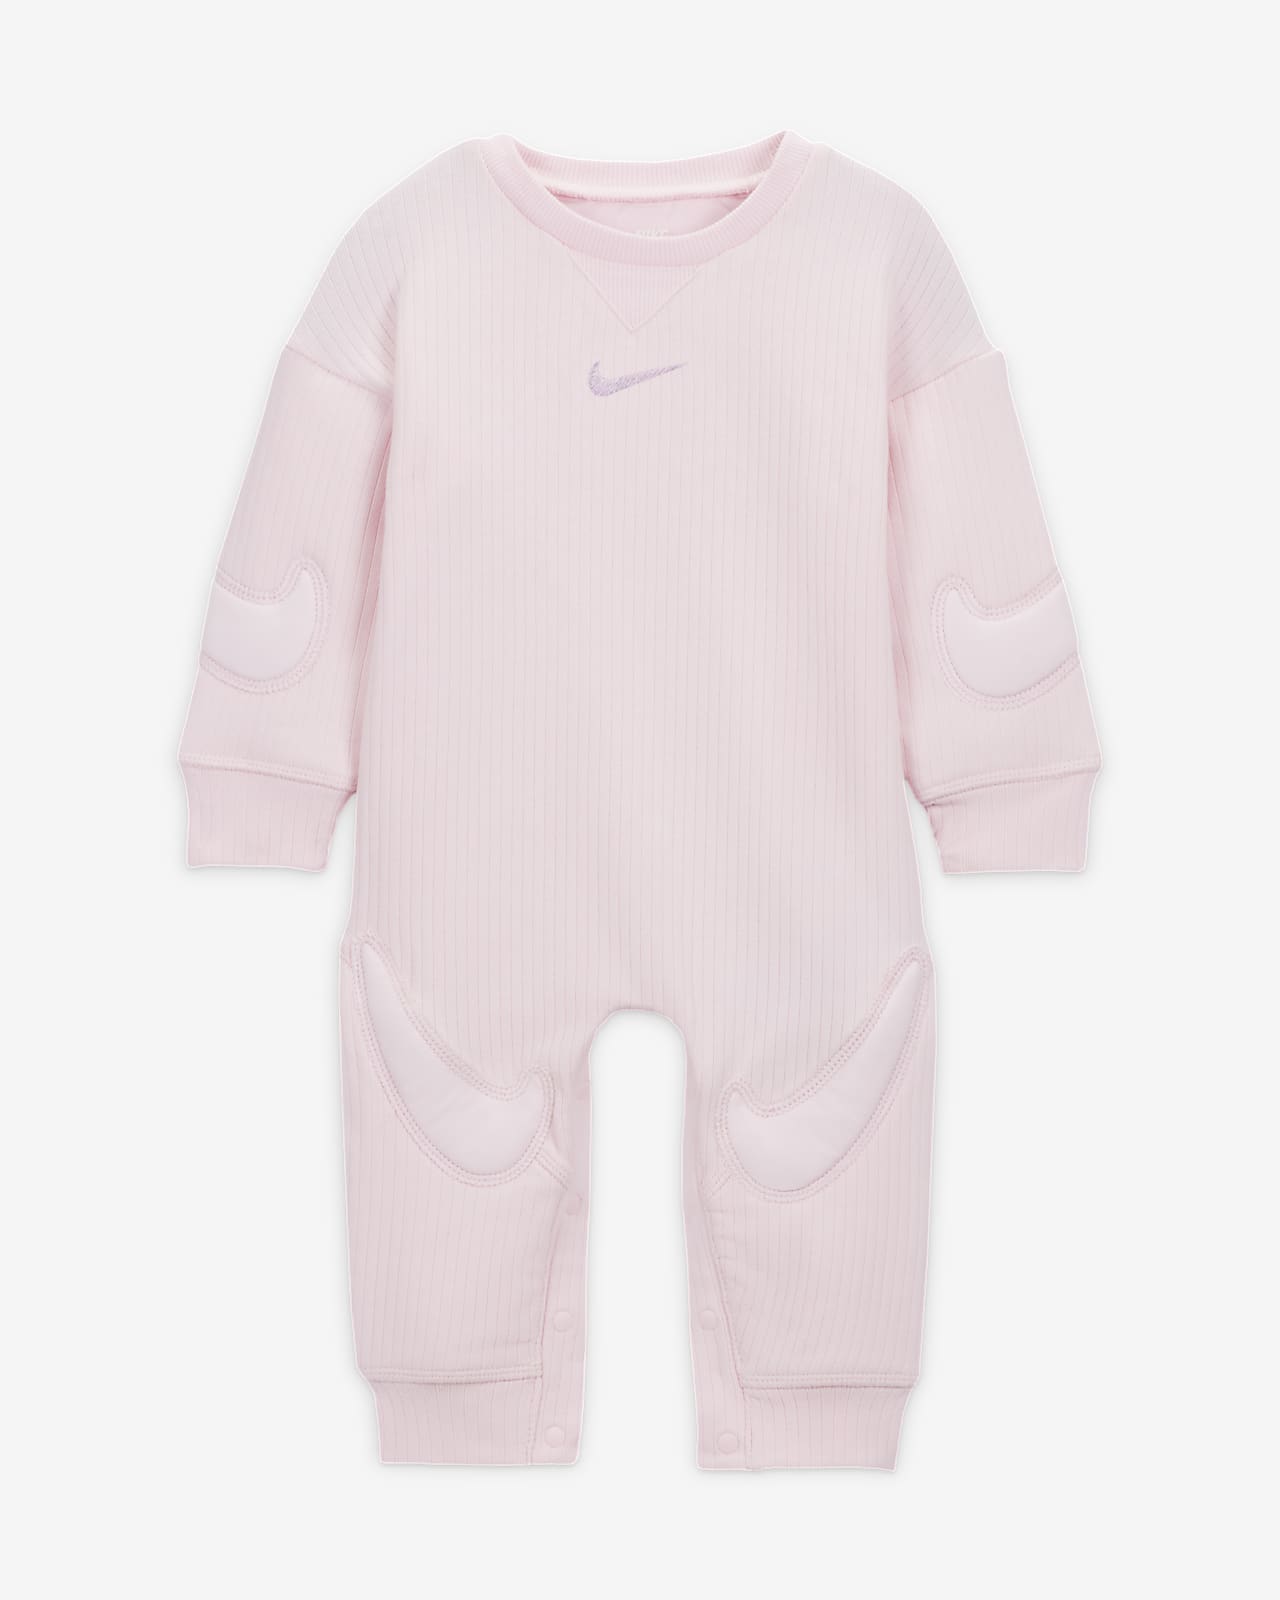 Nike "Ready, Set" Baby Coveralls